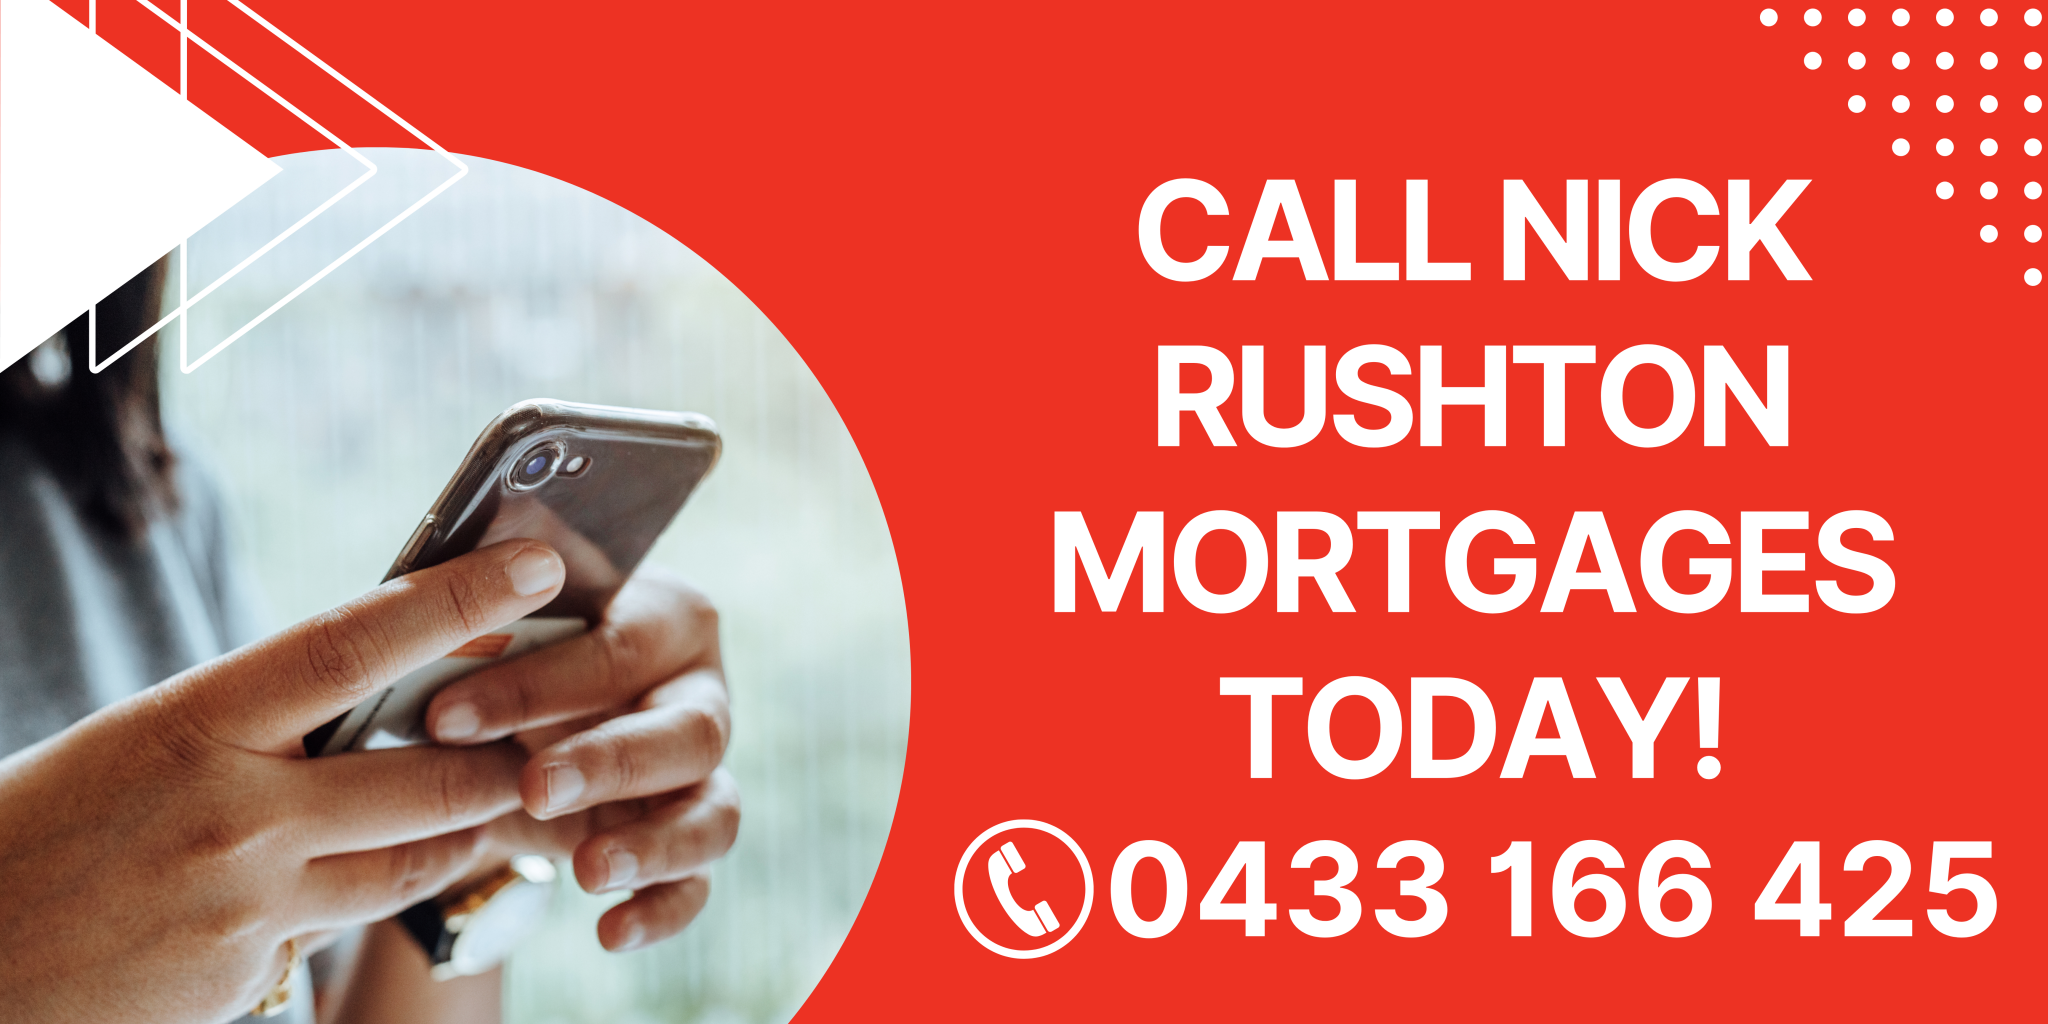 CALL NICK RUSHTON MORTGAGES TODAY! 0433166425